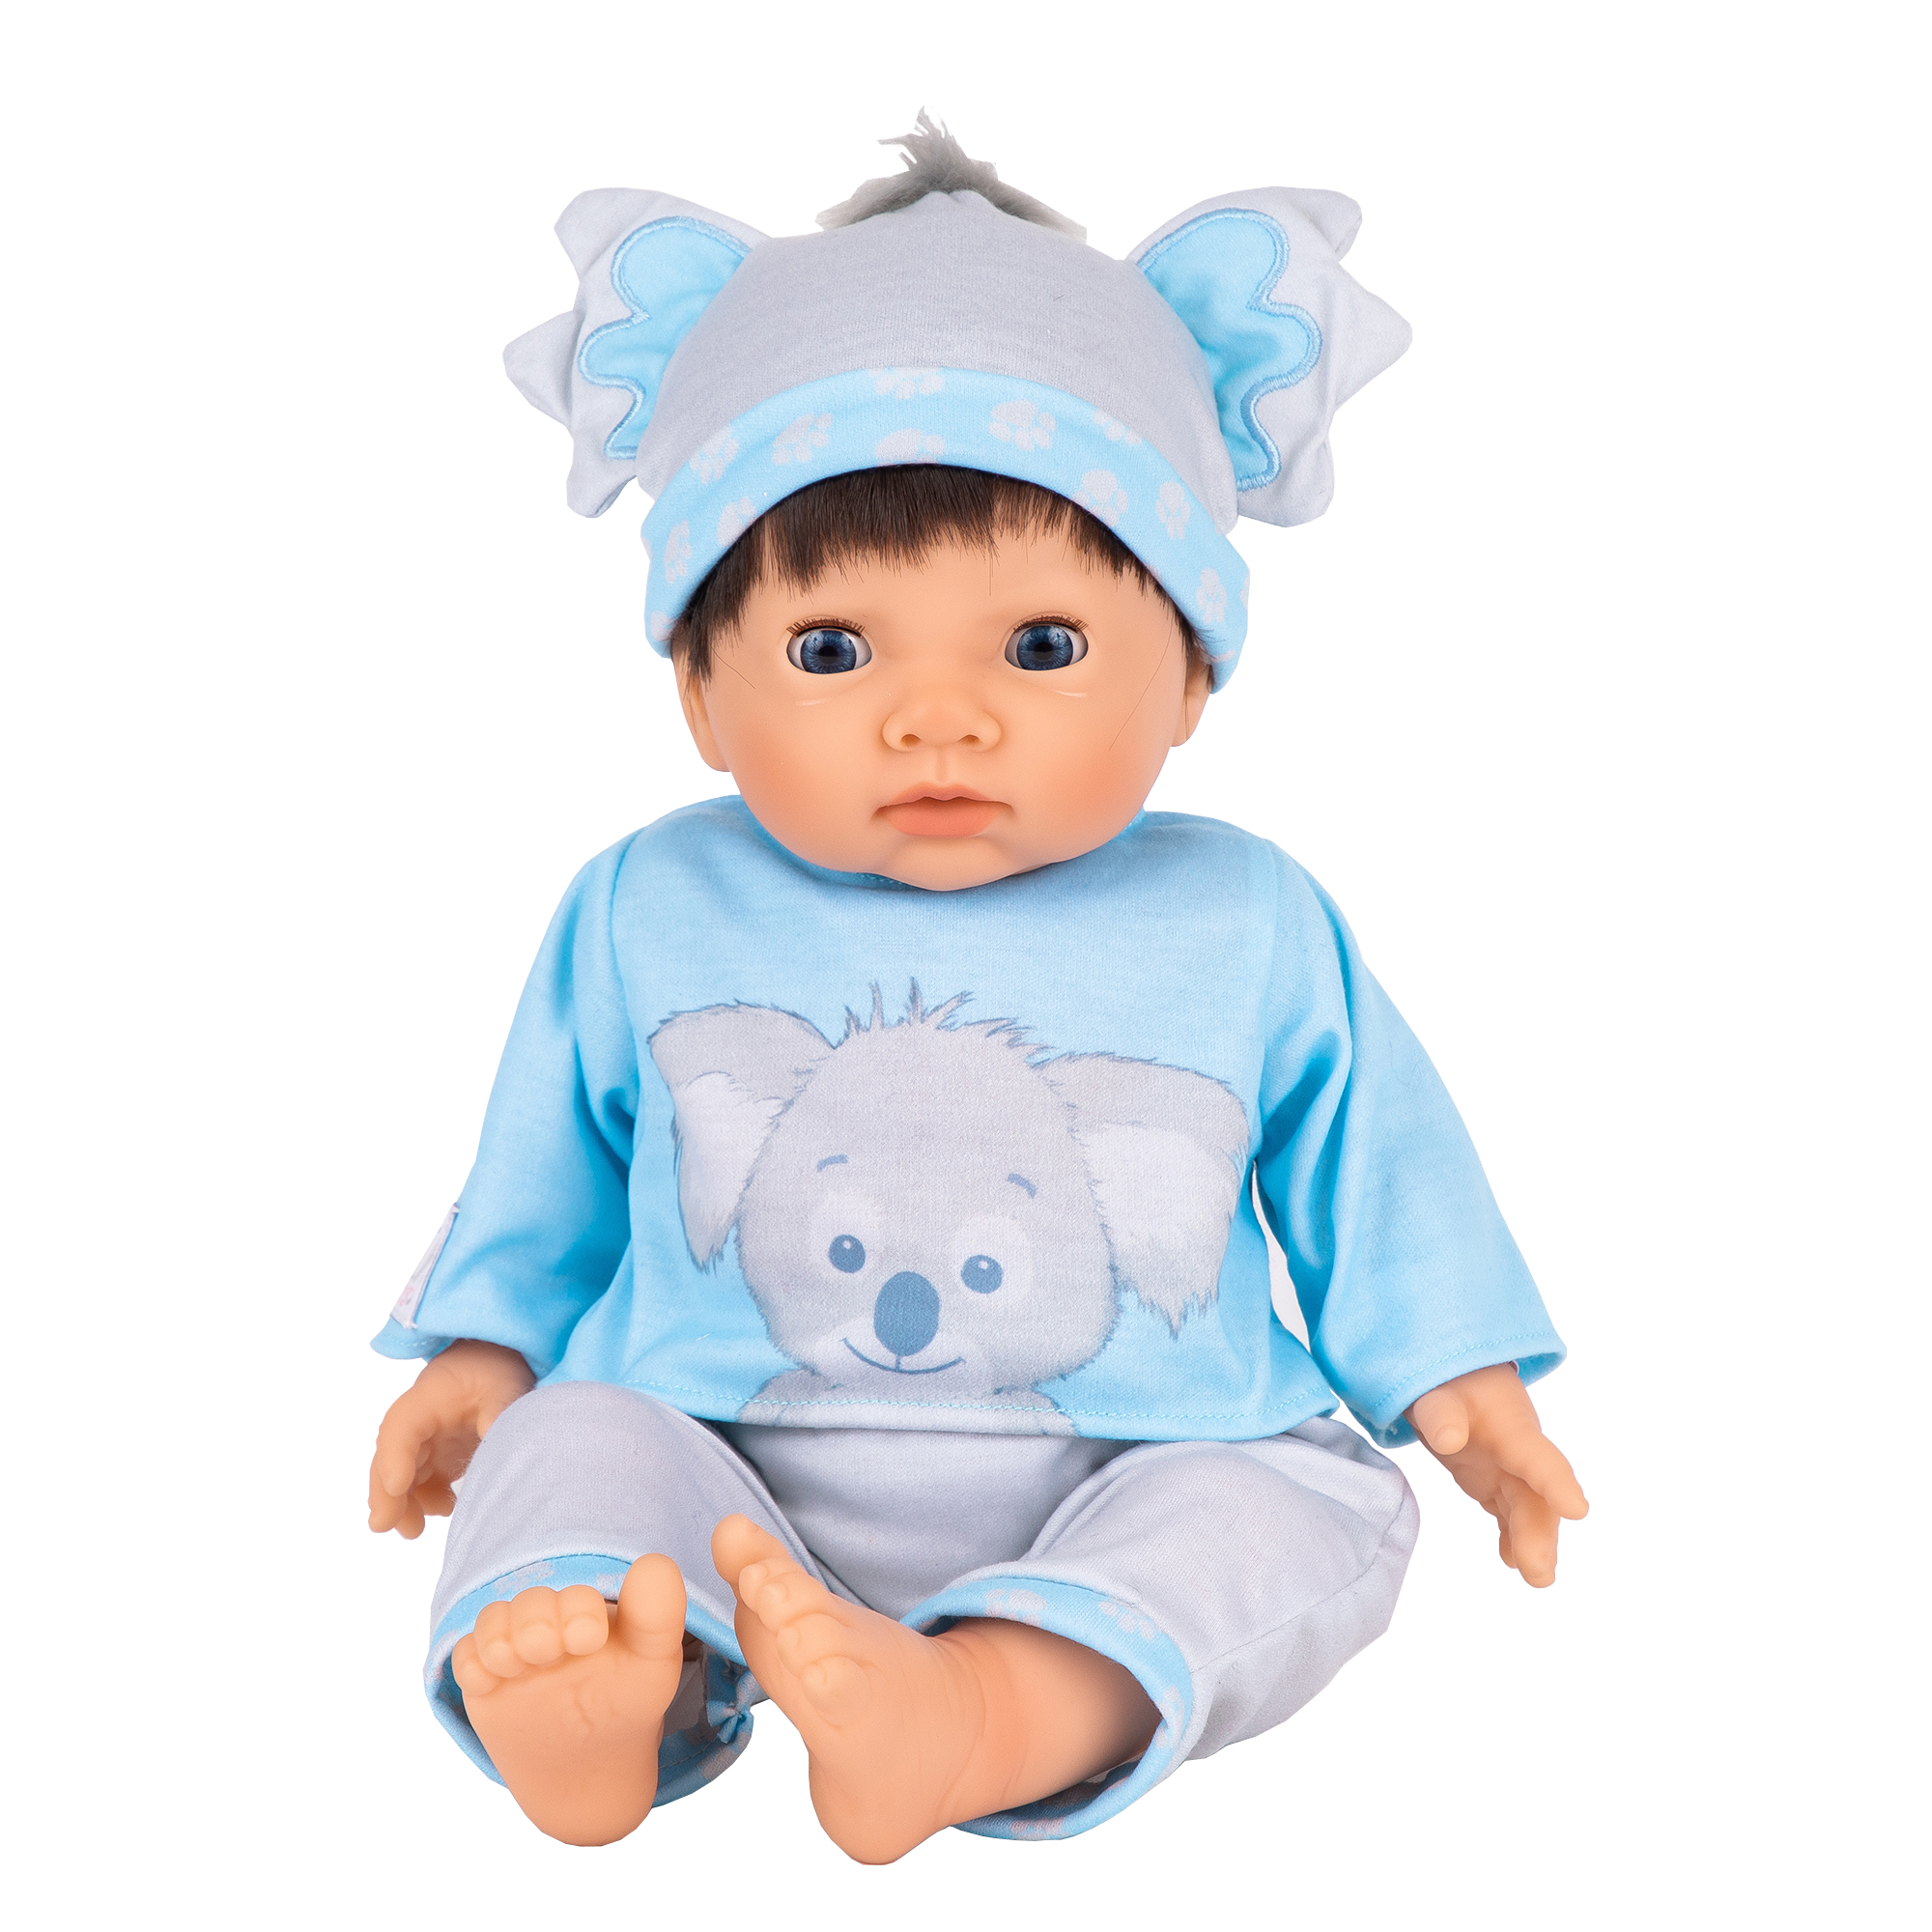 Baby Boy Tiny Treasures Doll with Blue Outfit Cute Realistic Kids Play Doll NEW 